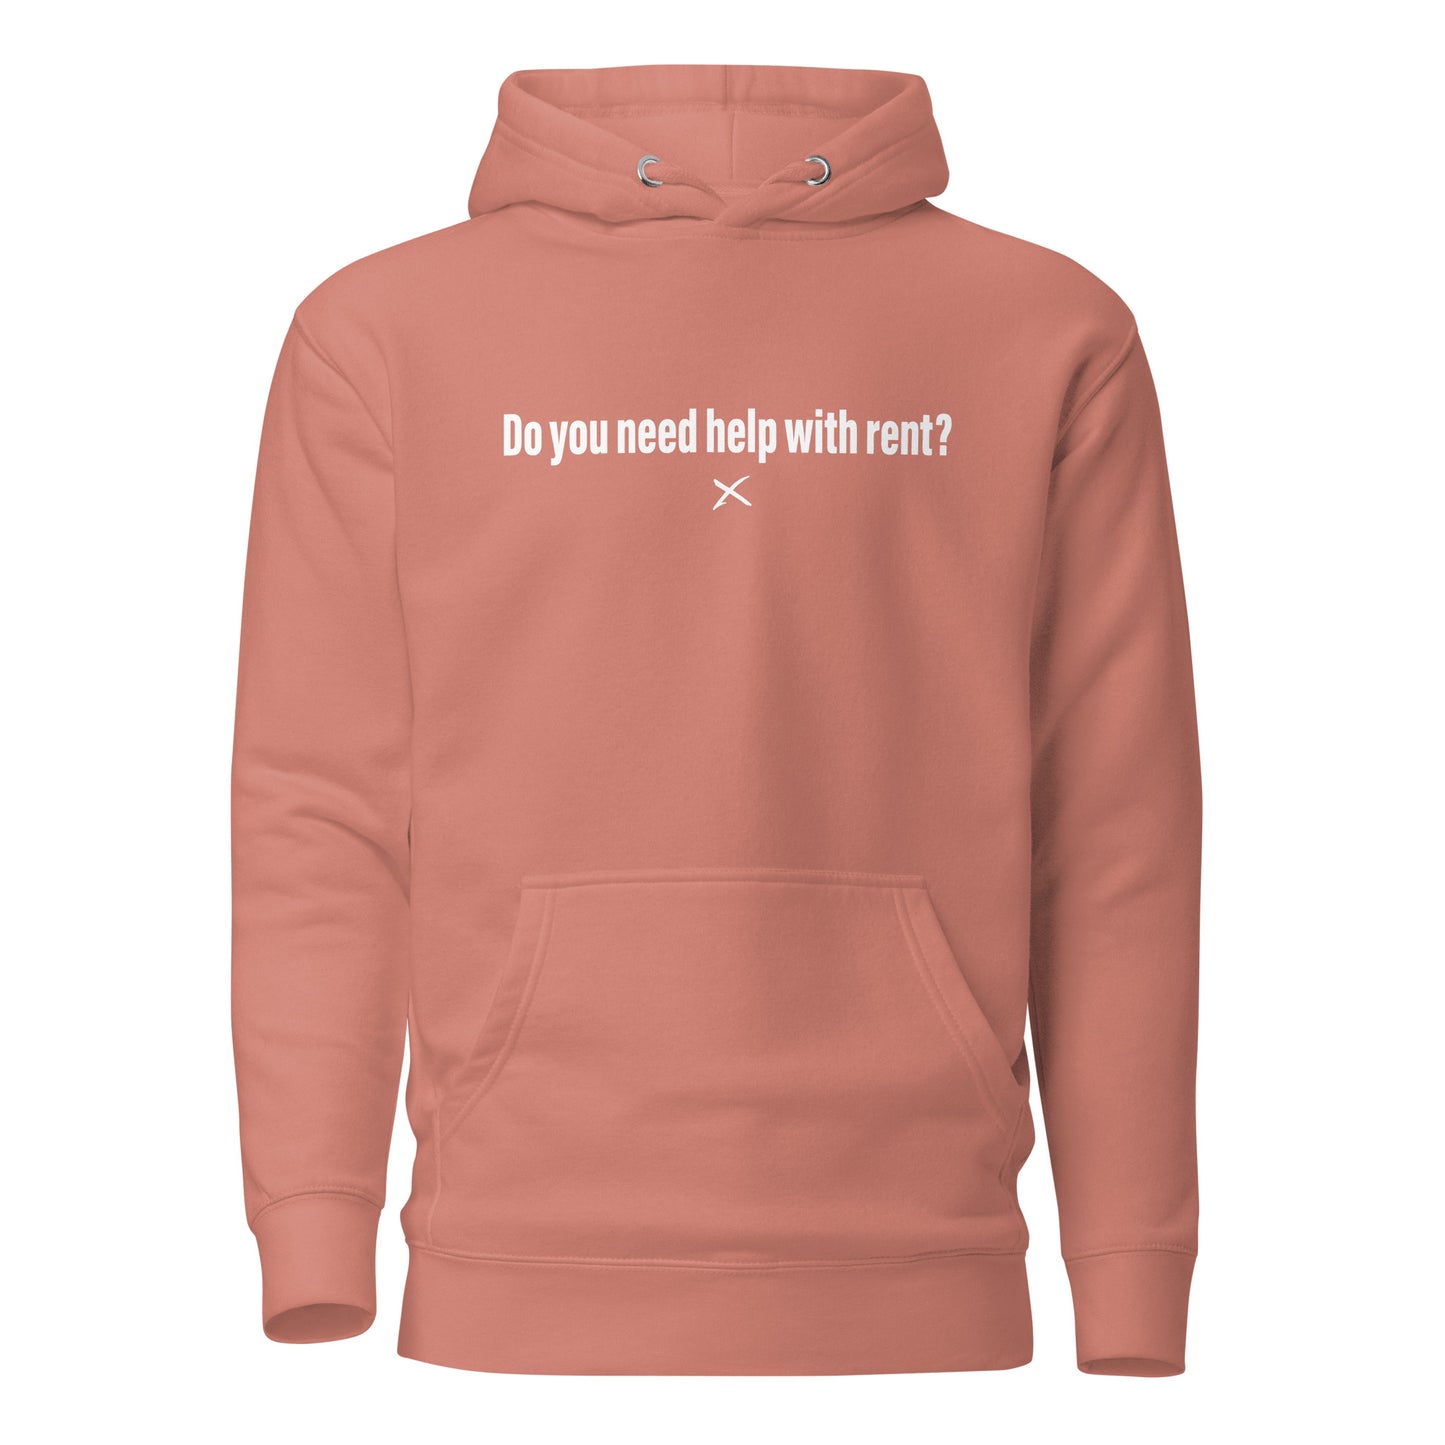 Do you need help with rent? - Hoodie